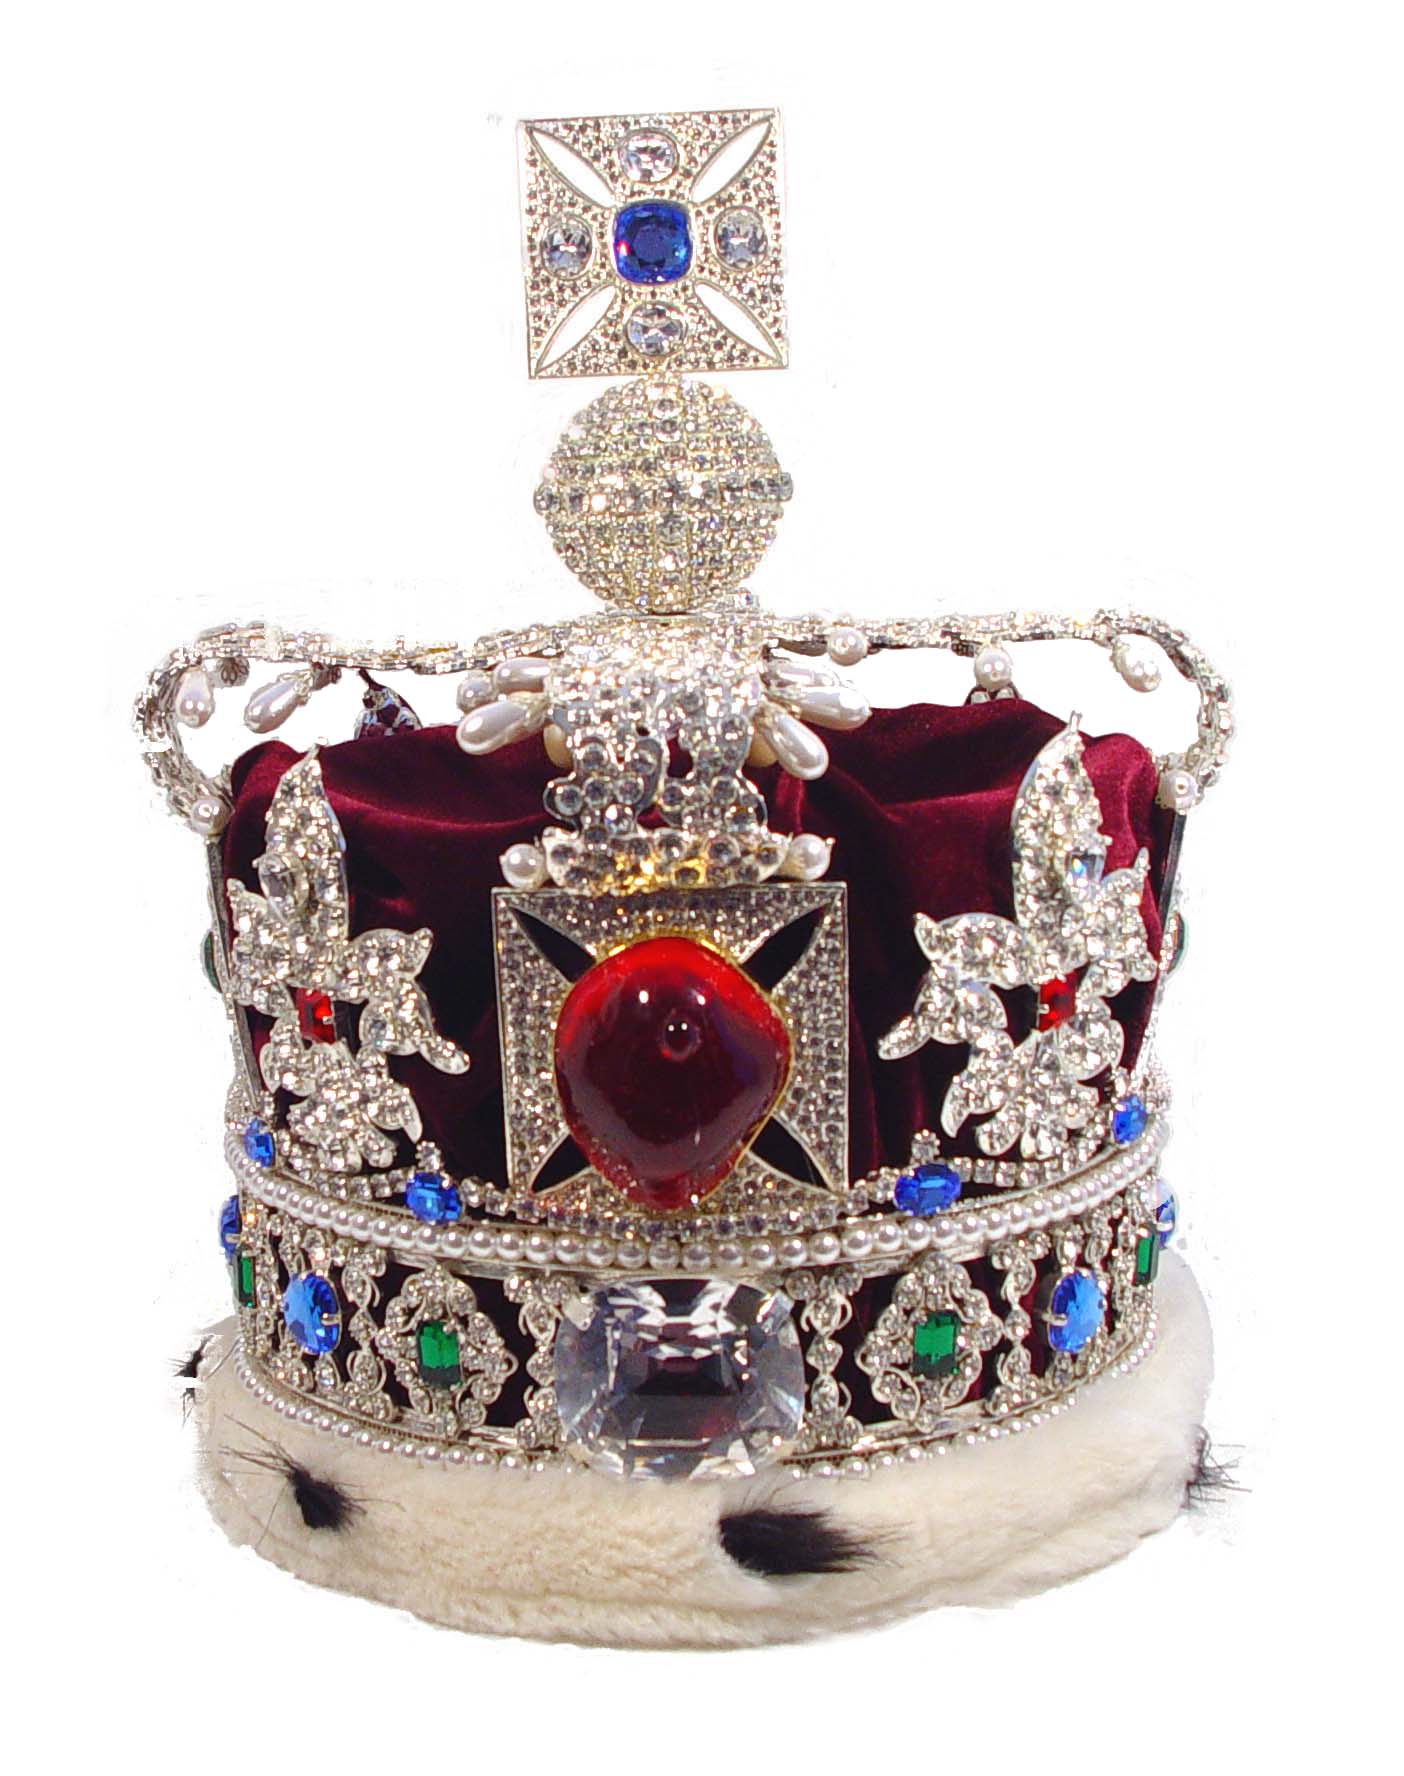 Imperial State Crown - Wikipedia